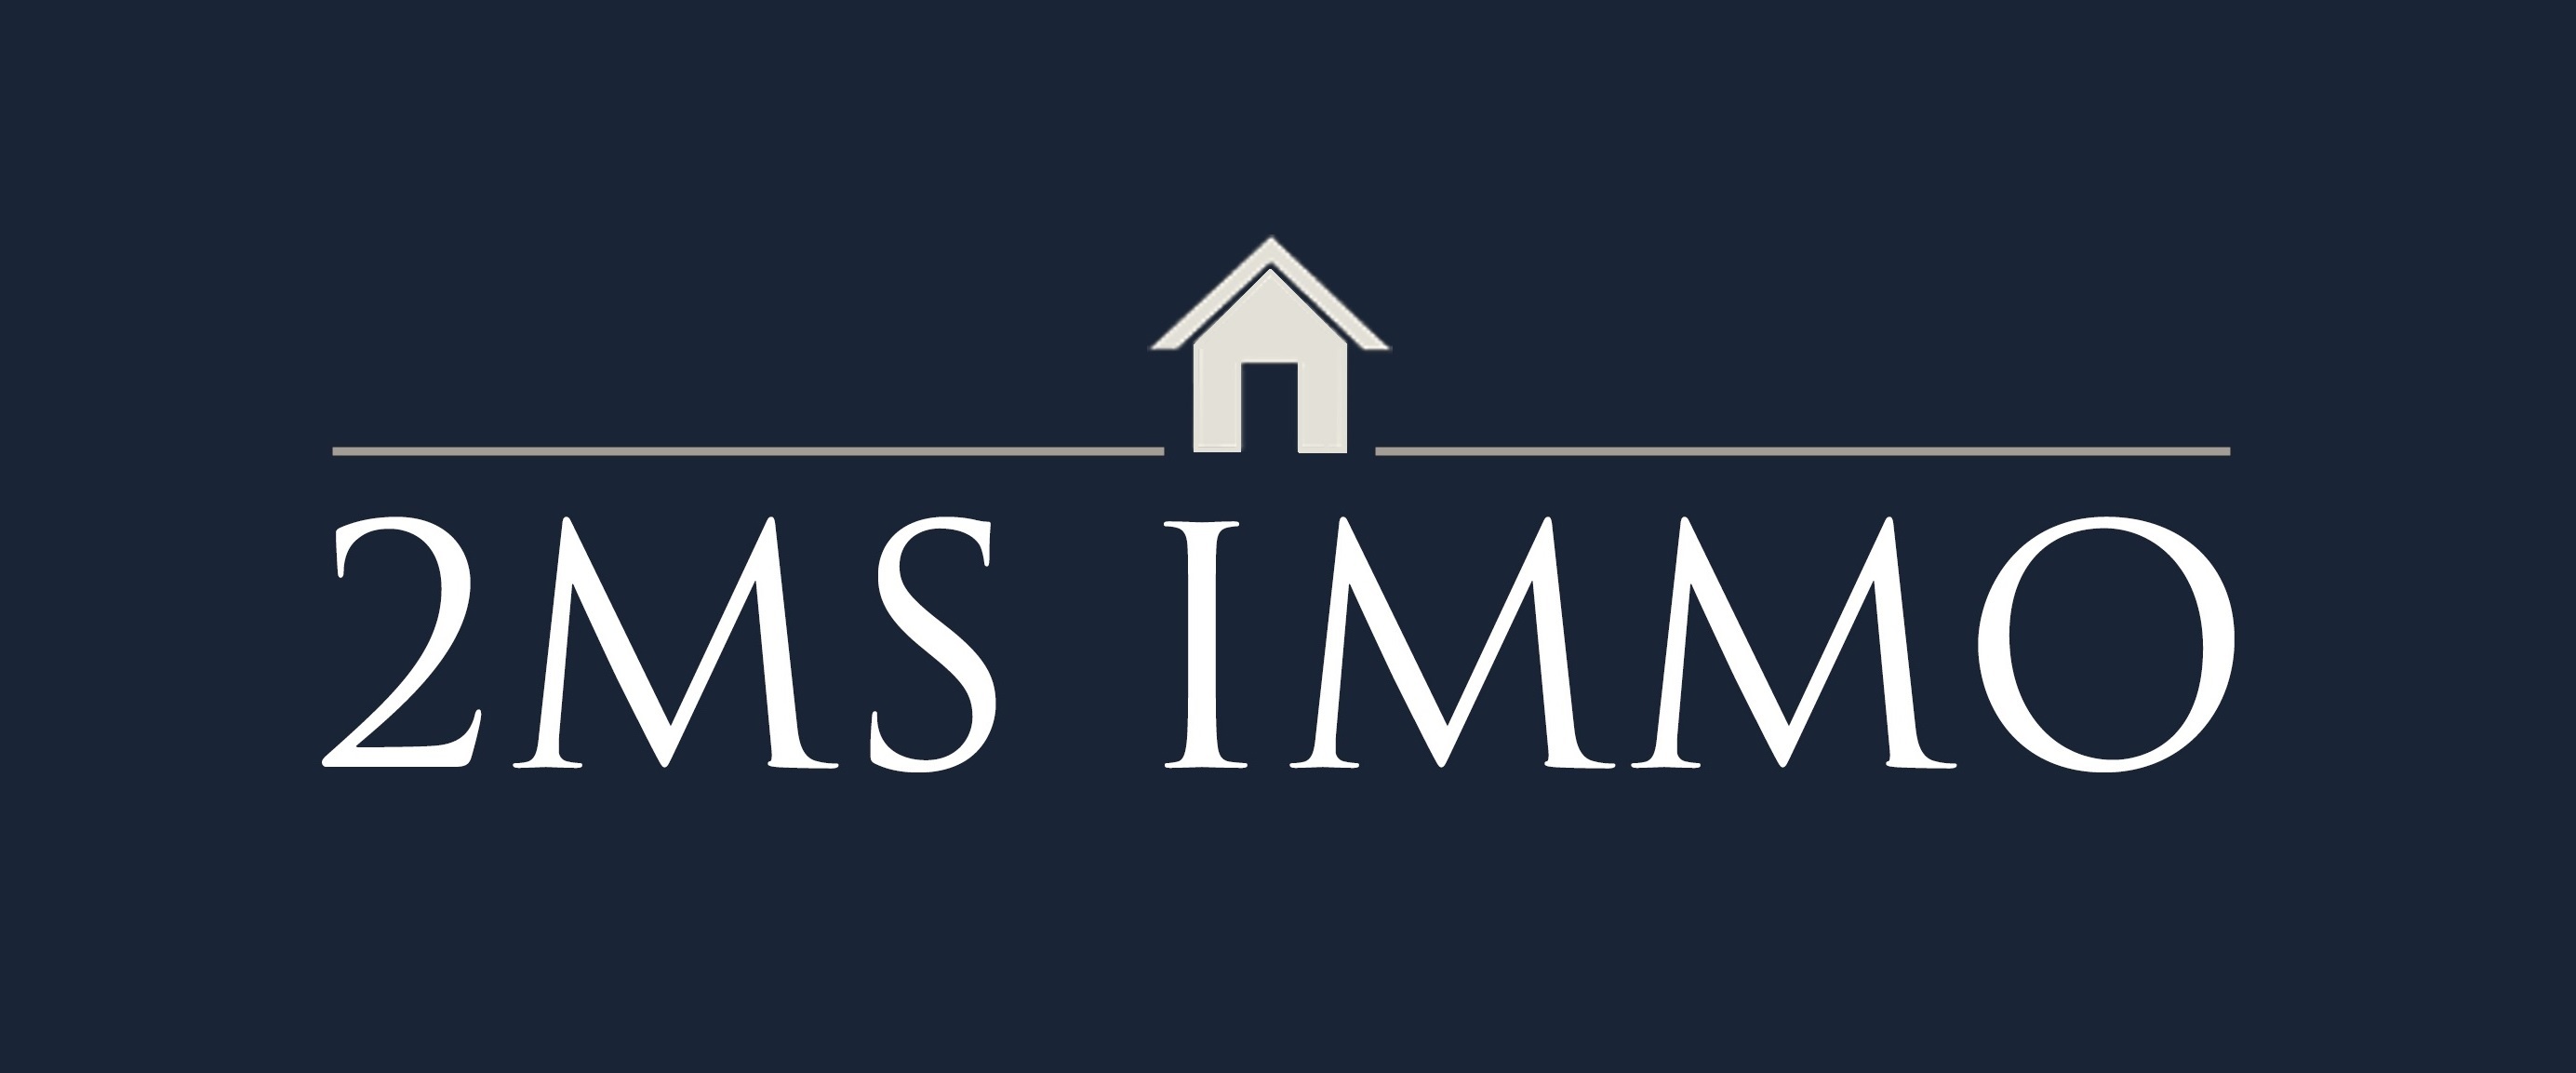 Agence immobilière à Richwiller 2ms Immo